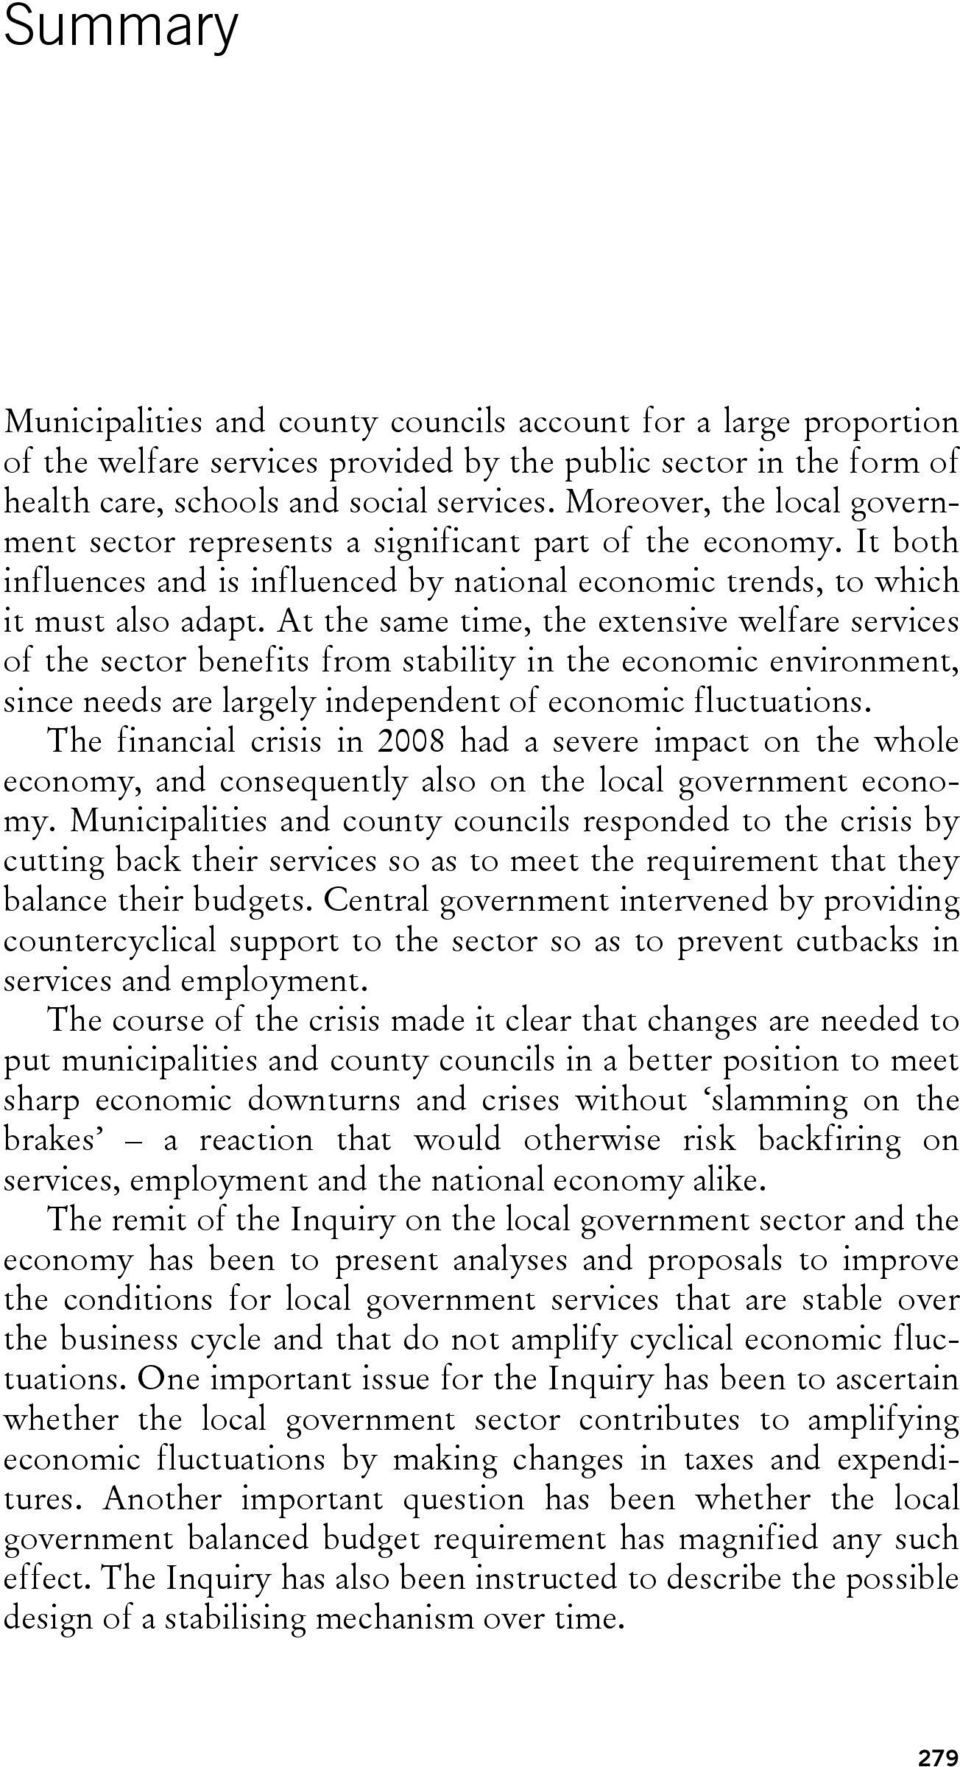 At the same time, the extensive welfare services of the sector benefits from stability in the economic environment, since needs are largely independent of economic fluctuations.